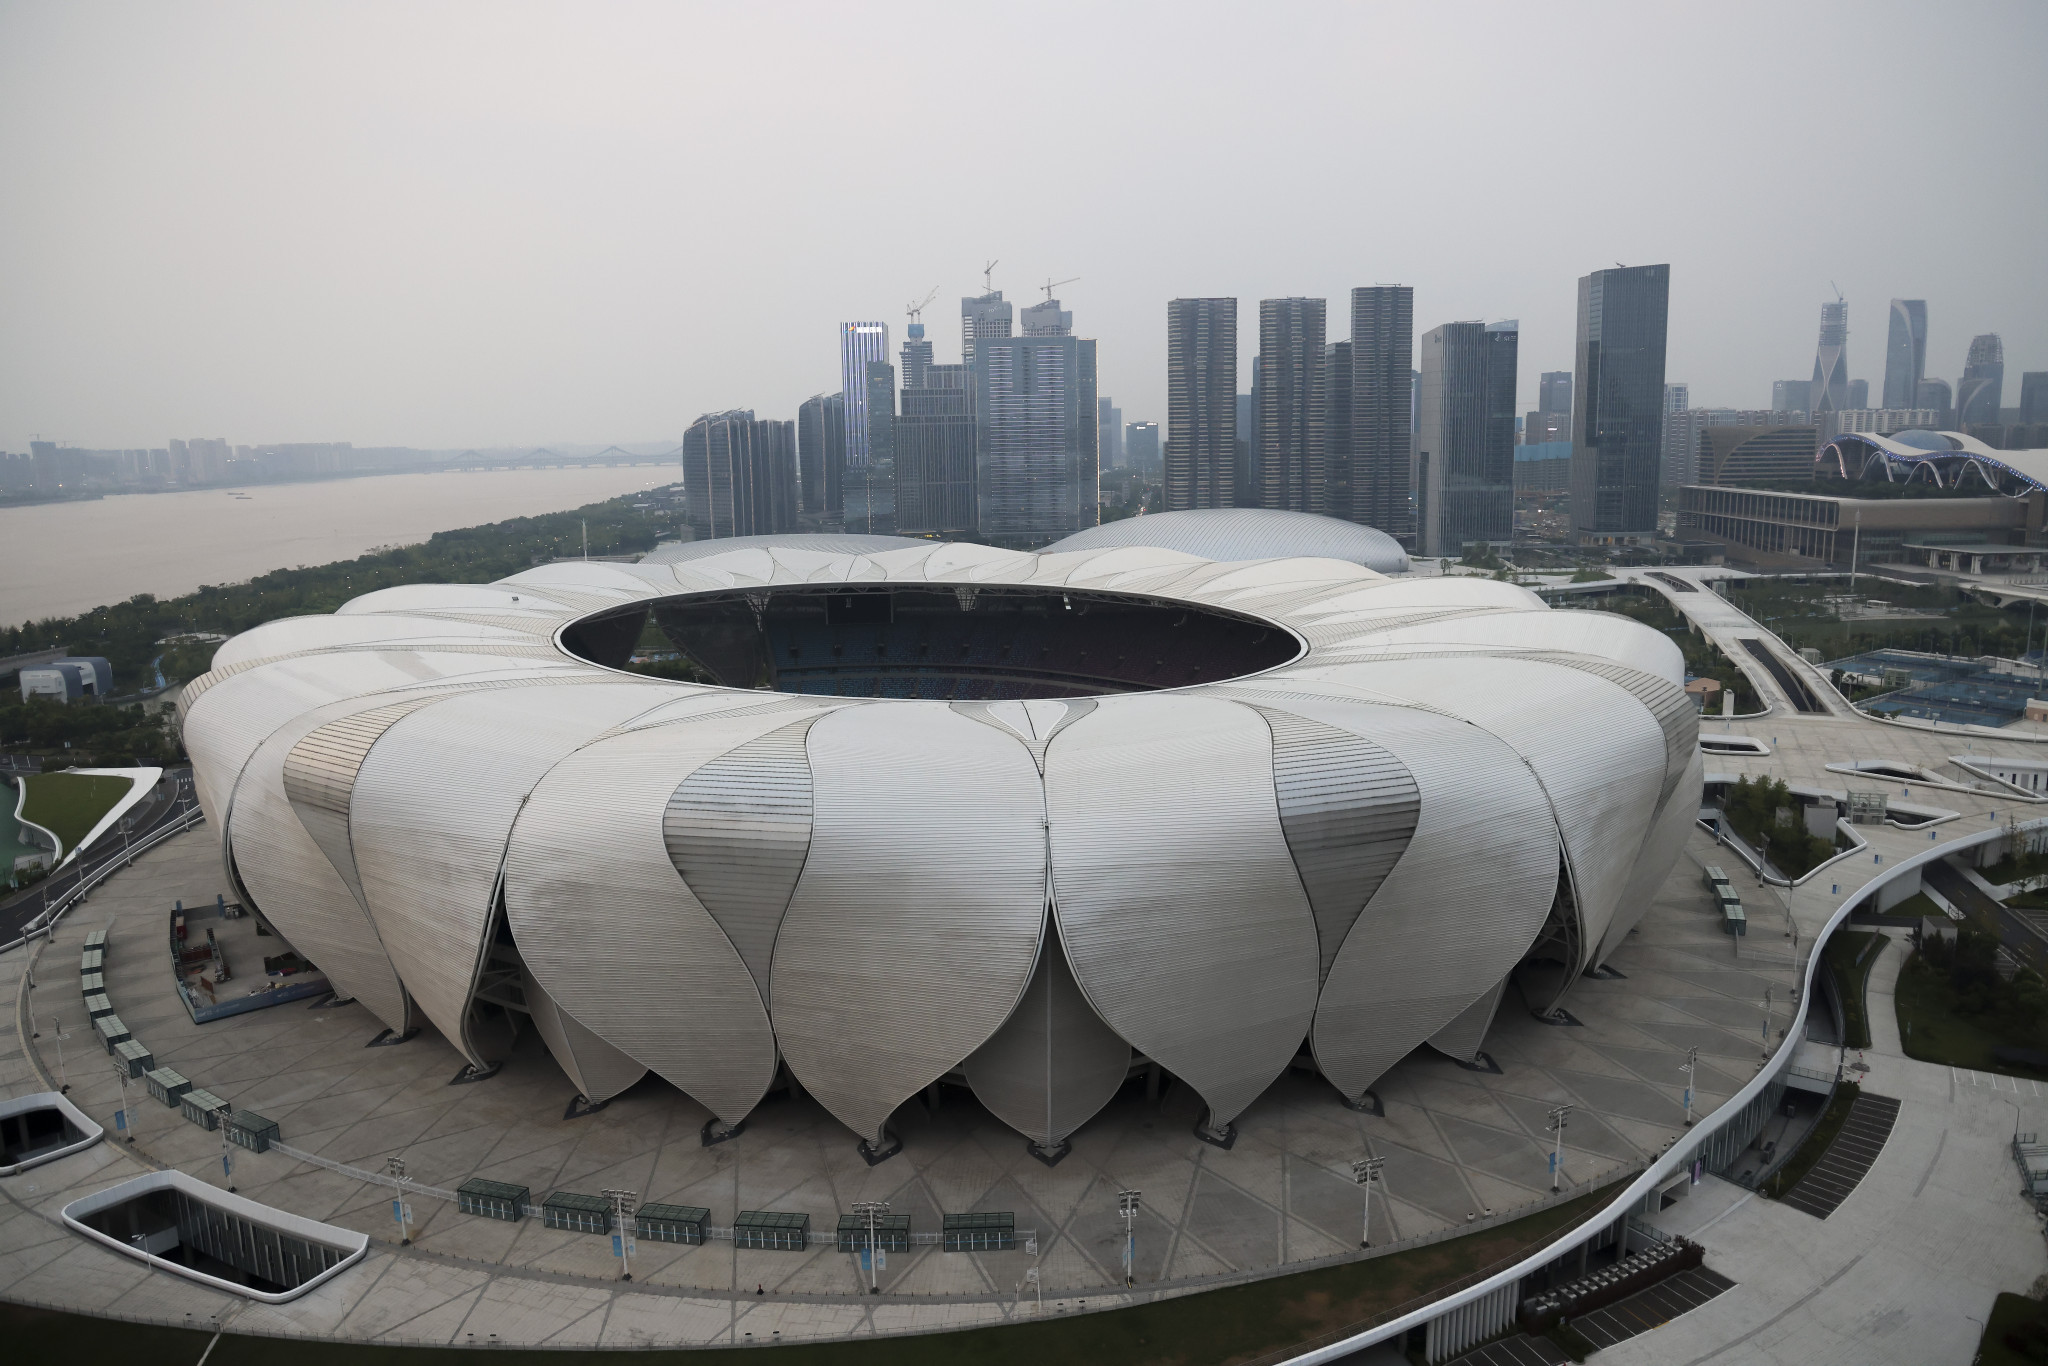 Organisers claim more than five million have used Hangzhou 2022 venues and COVID-19 situation "improving drastically"